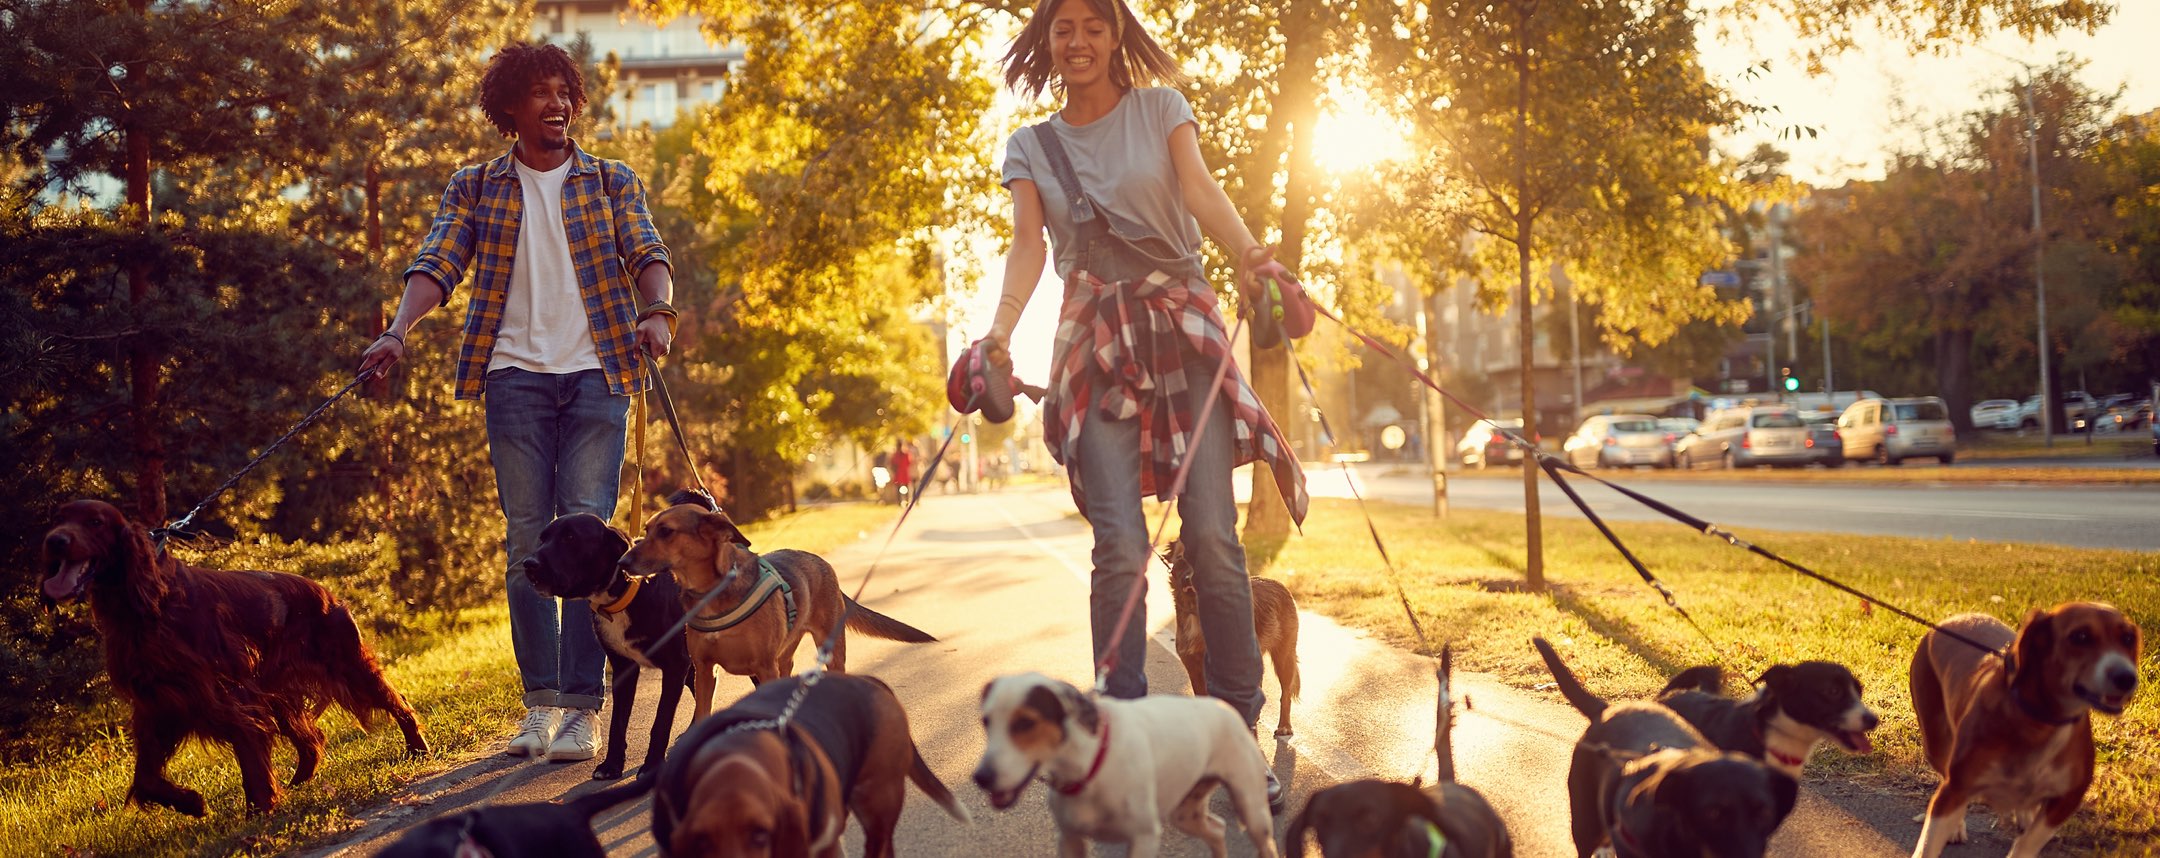 Woman walking with several dogs